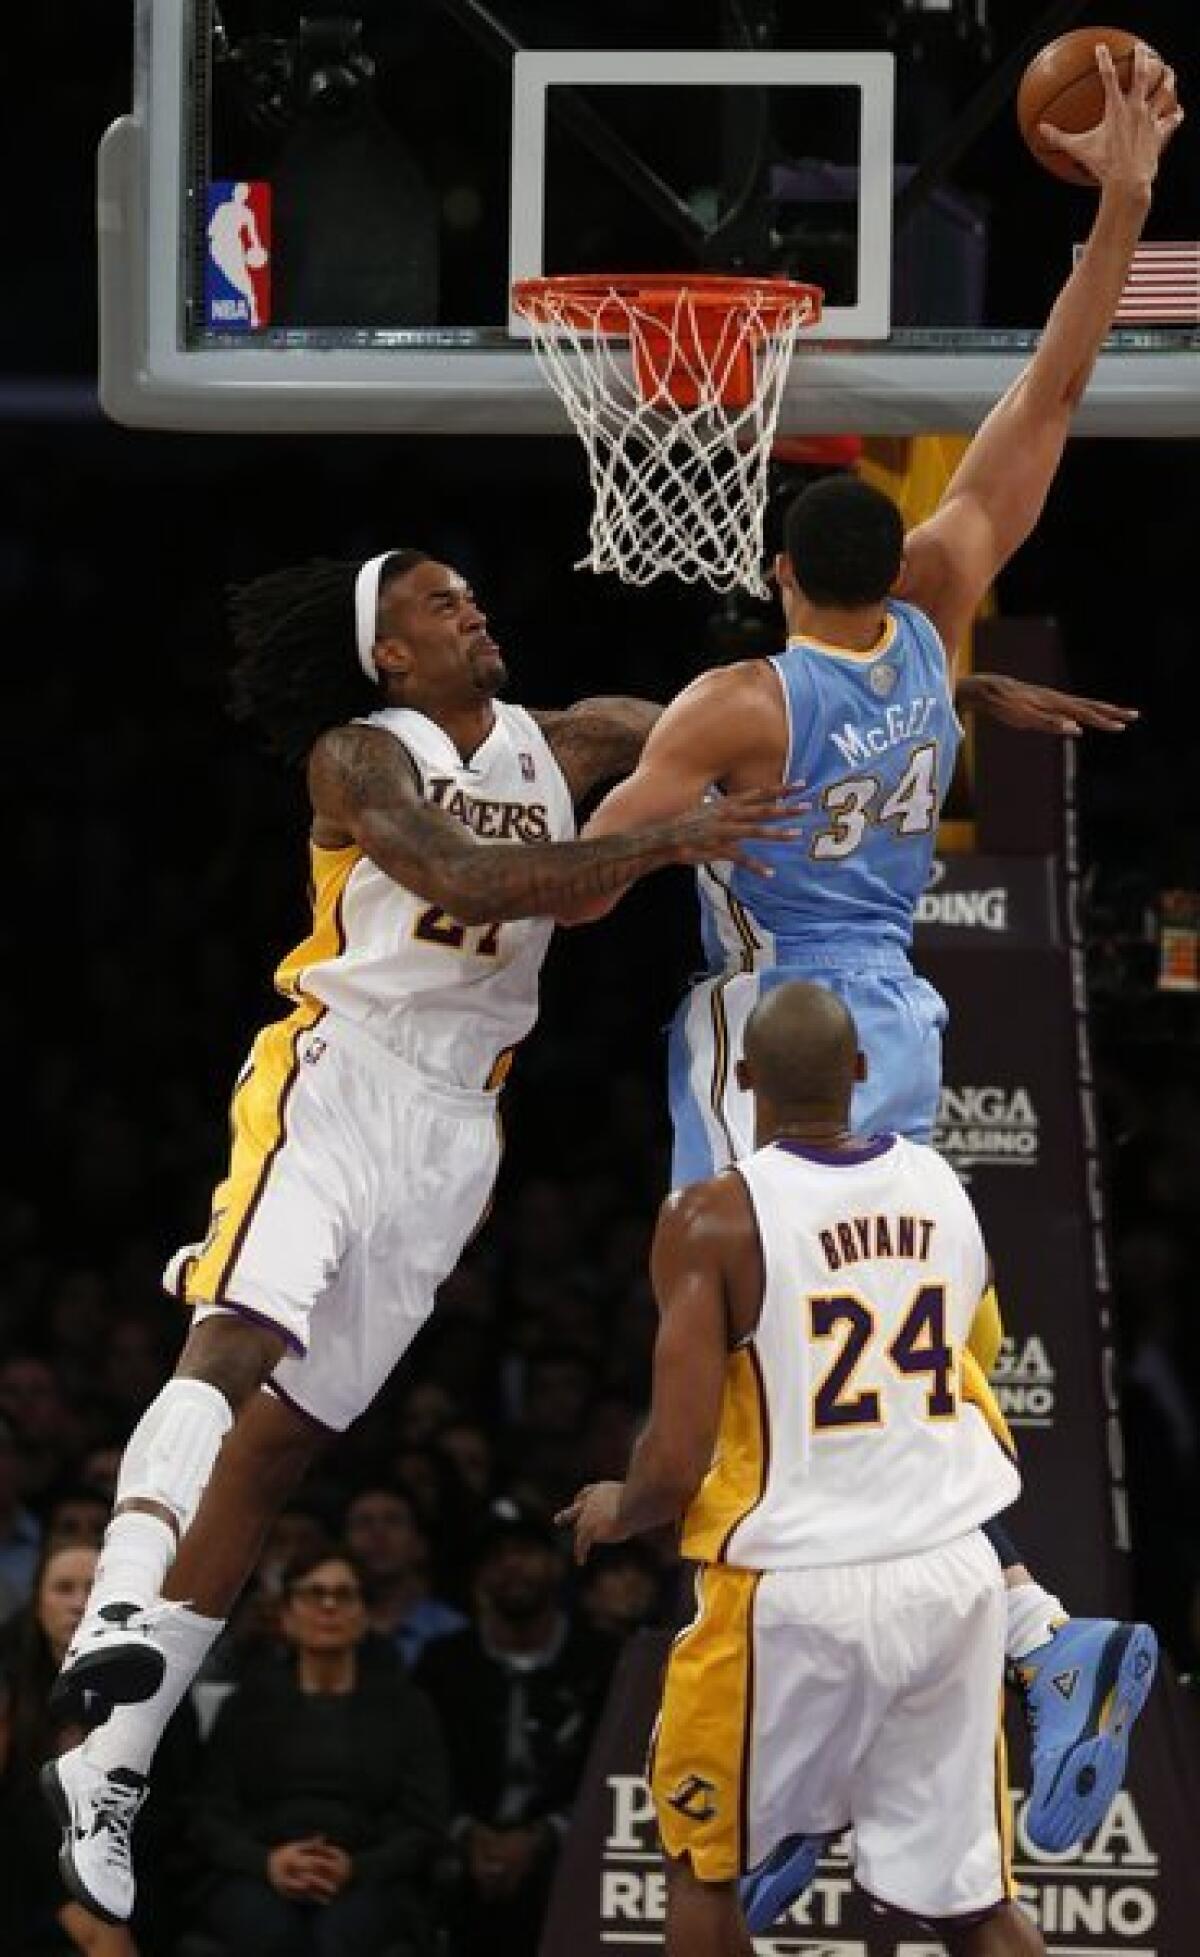 Nuggets center JaVale McGee misses a dunk attempt over Jordan Hill during the game in which which Hill was injured.